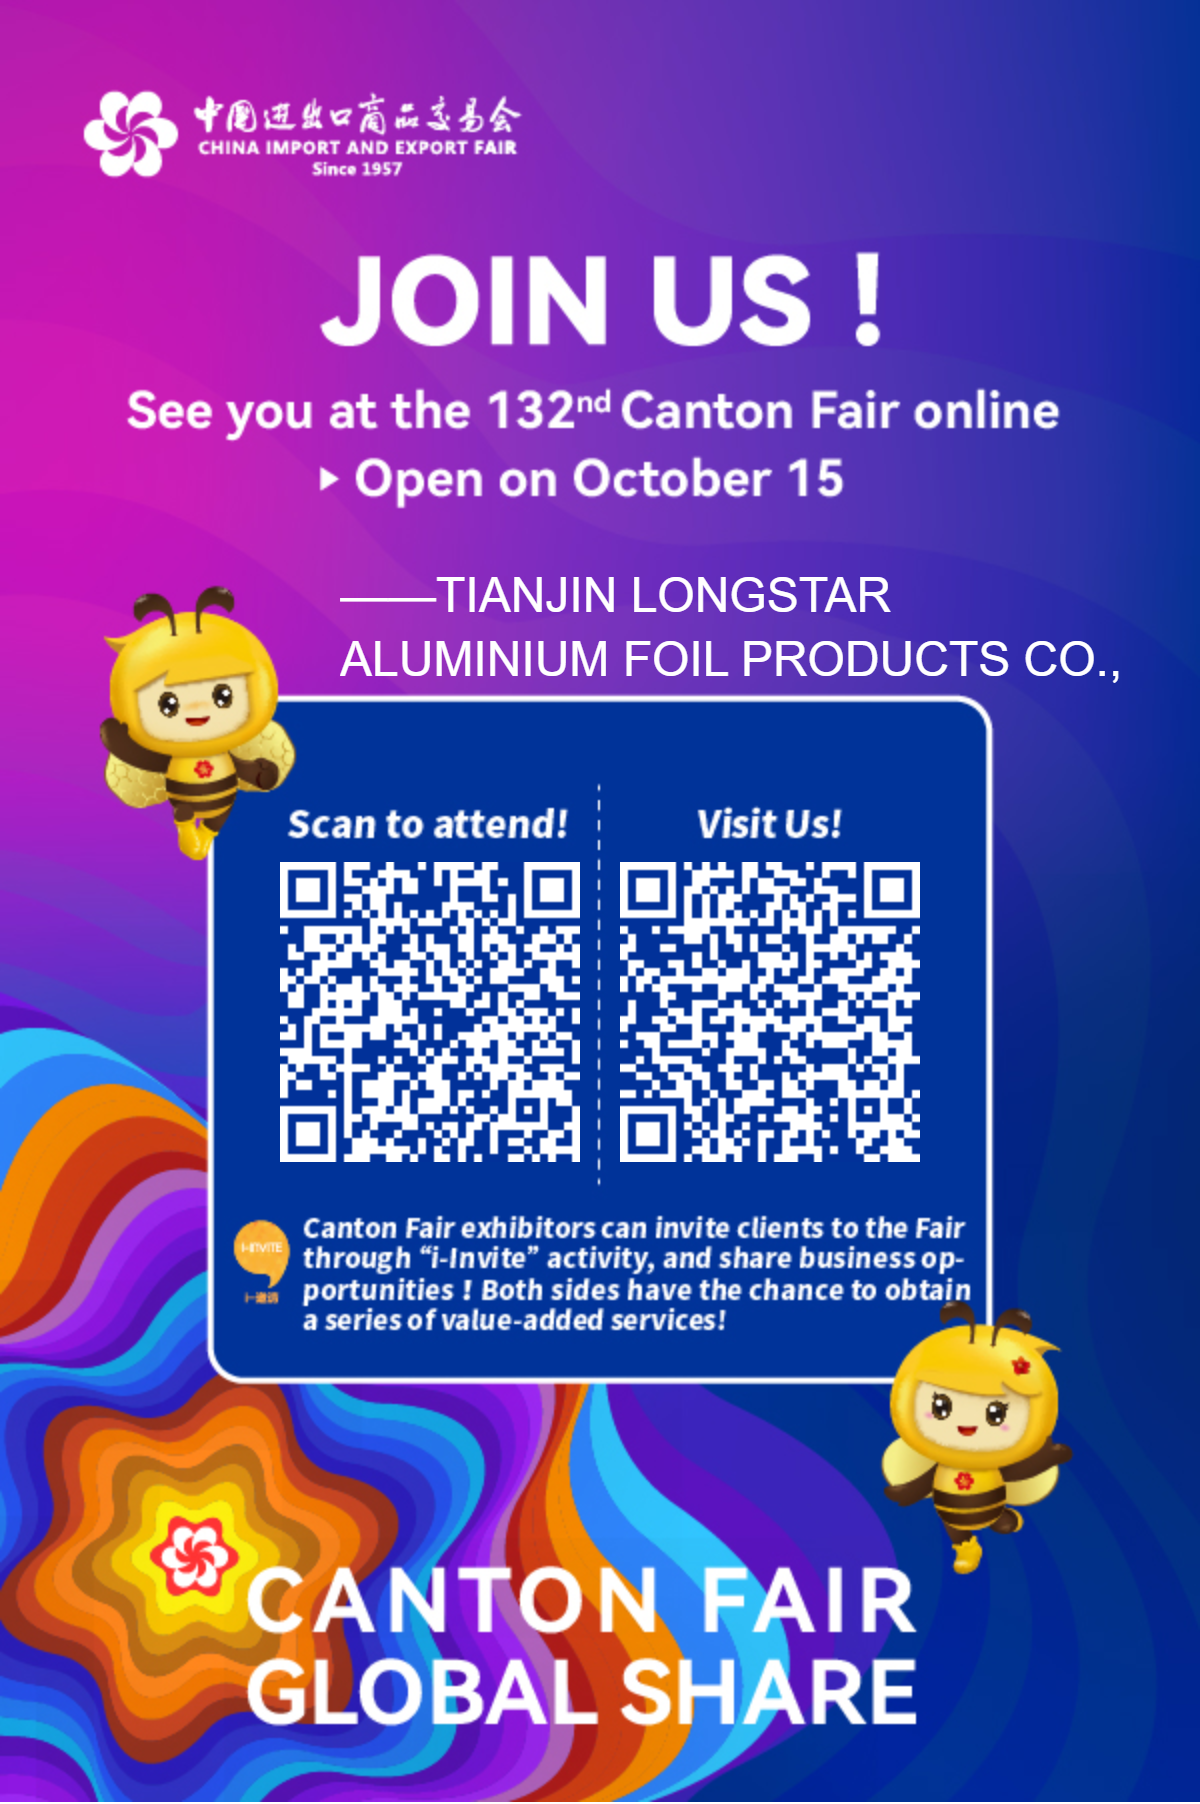 See you at the 132nd Canton Fair online